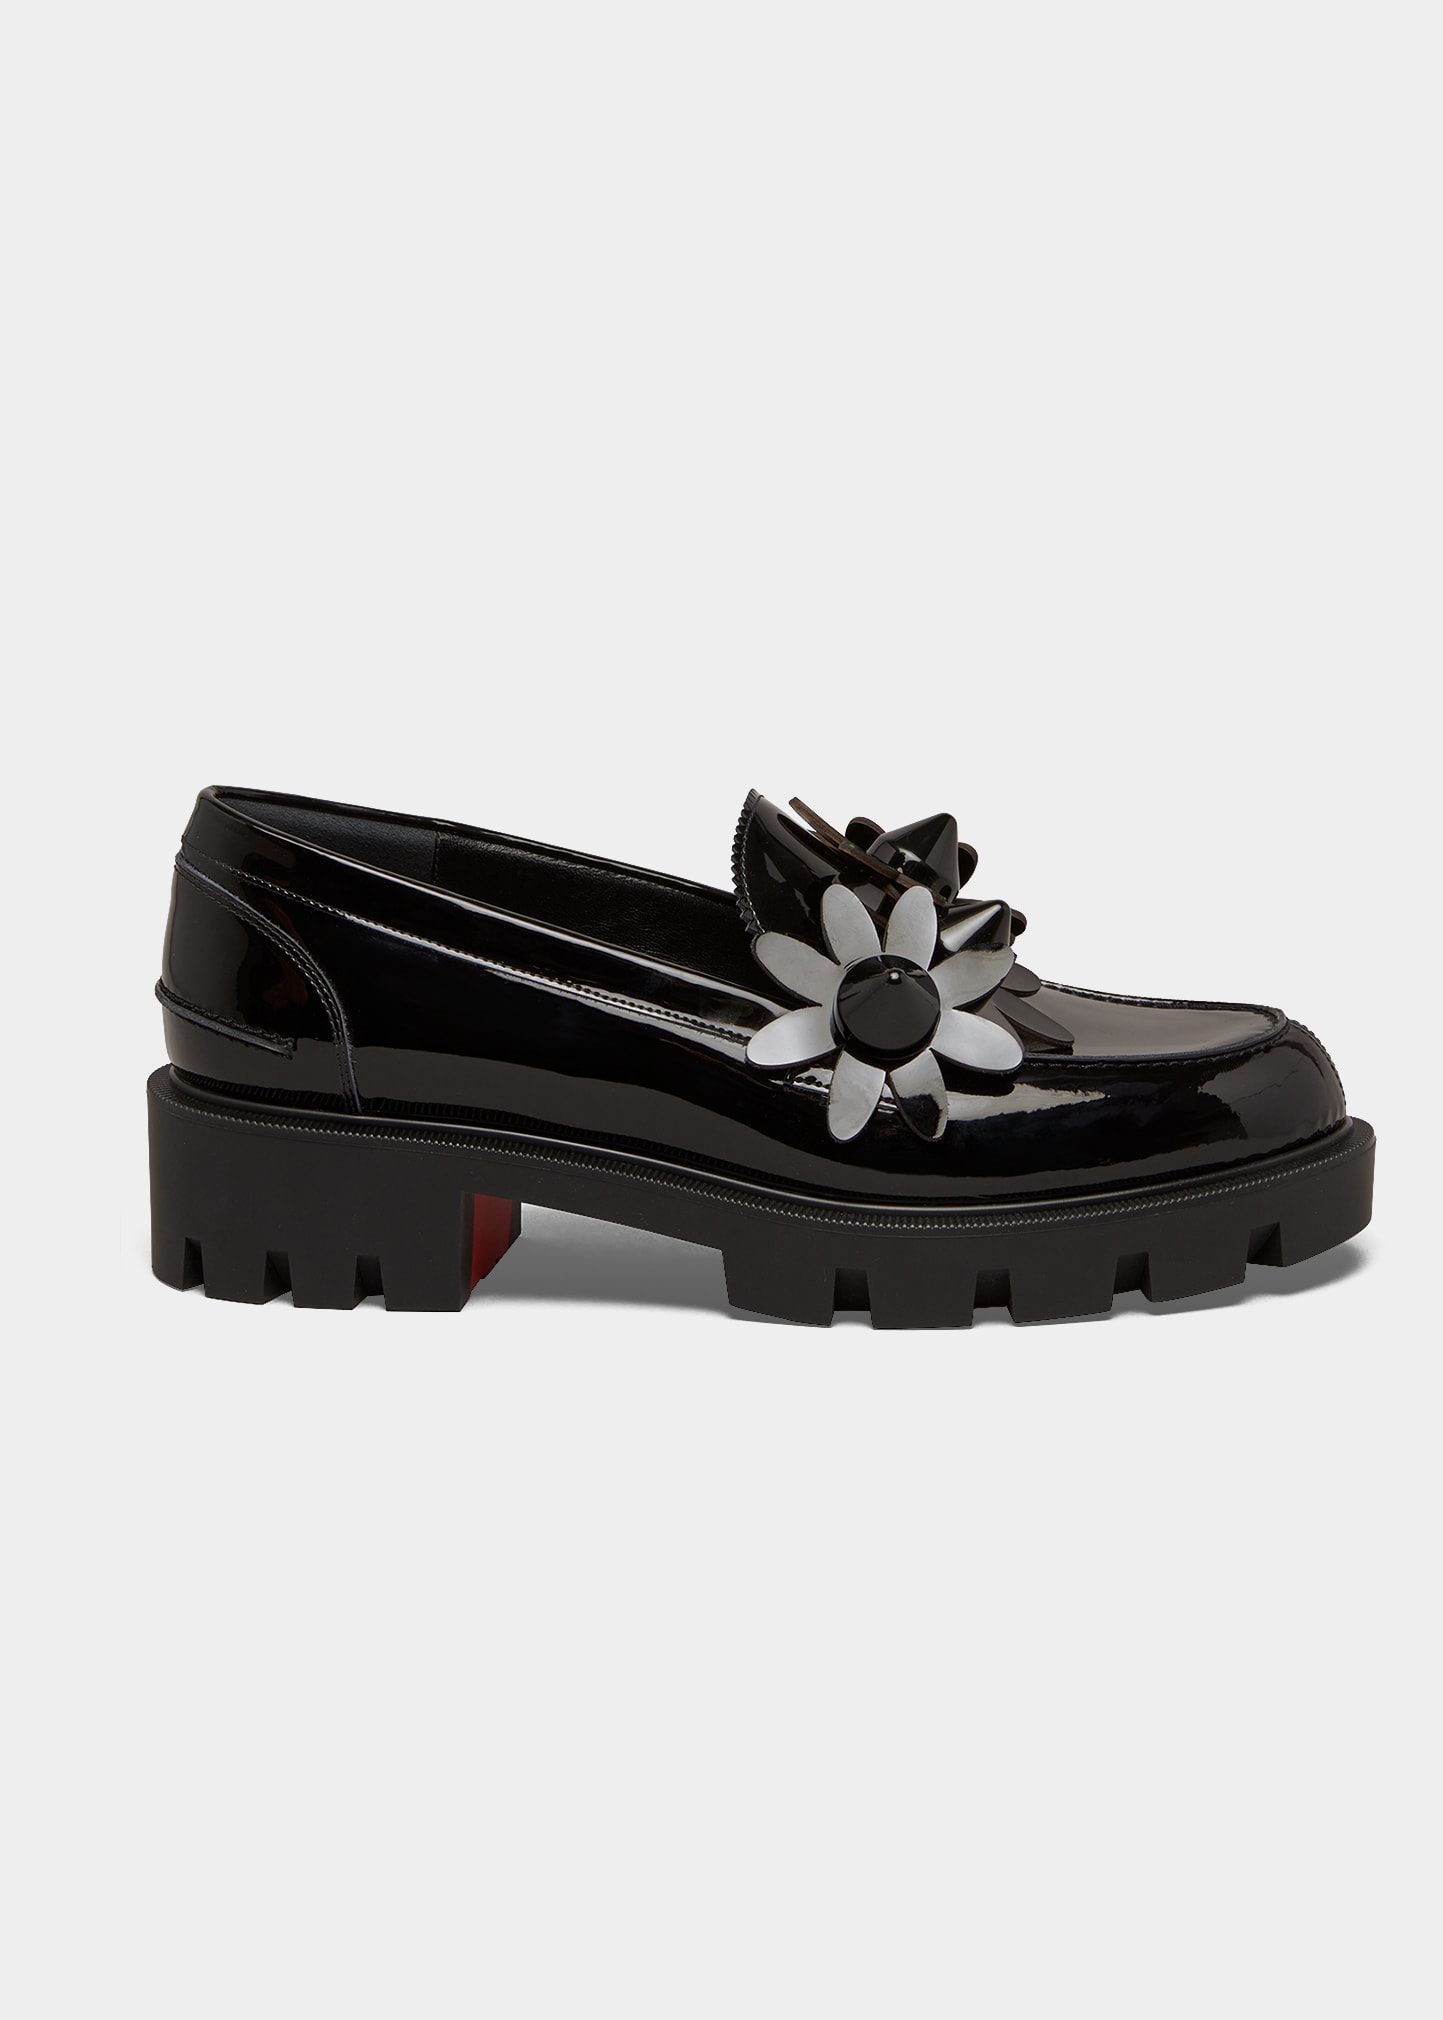 Christian Louboutin Daisy Spikes Patent Red Sole Loafers